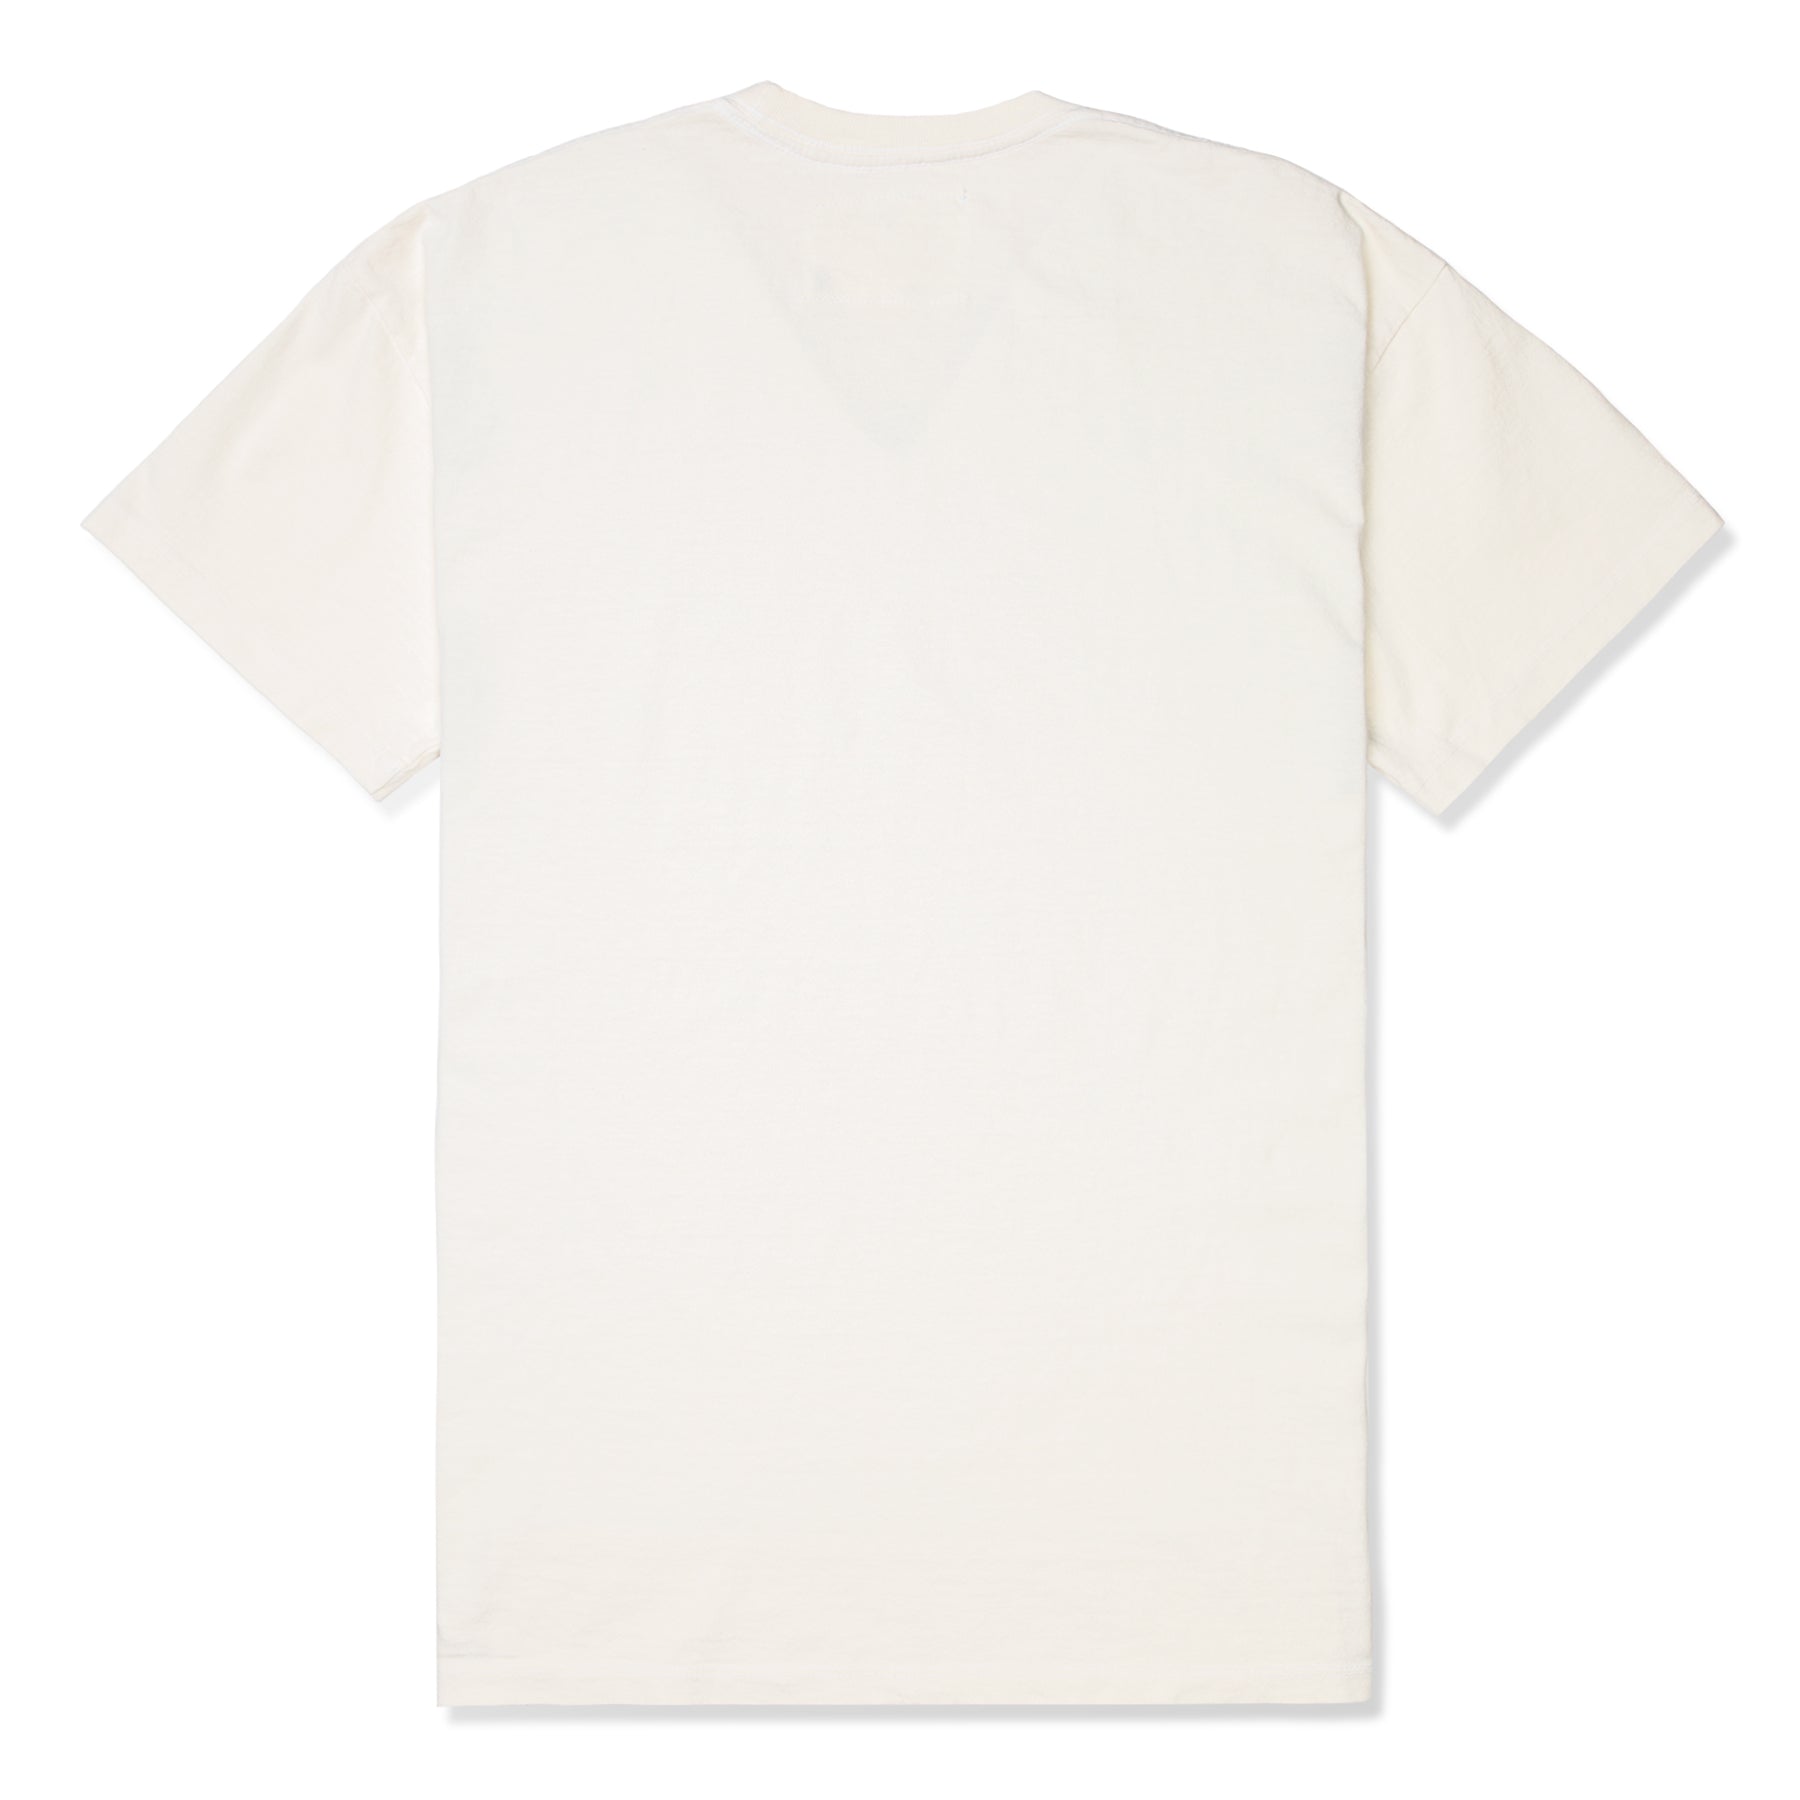 – T-Shirt White) Concepts Trail These of One (Off Days Ends